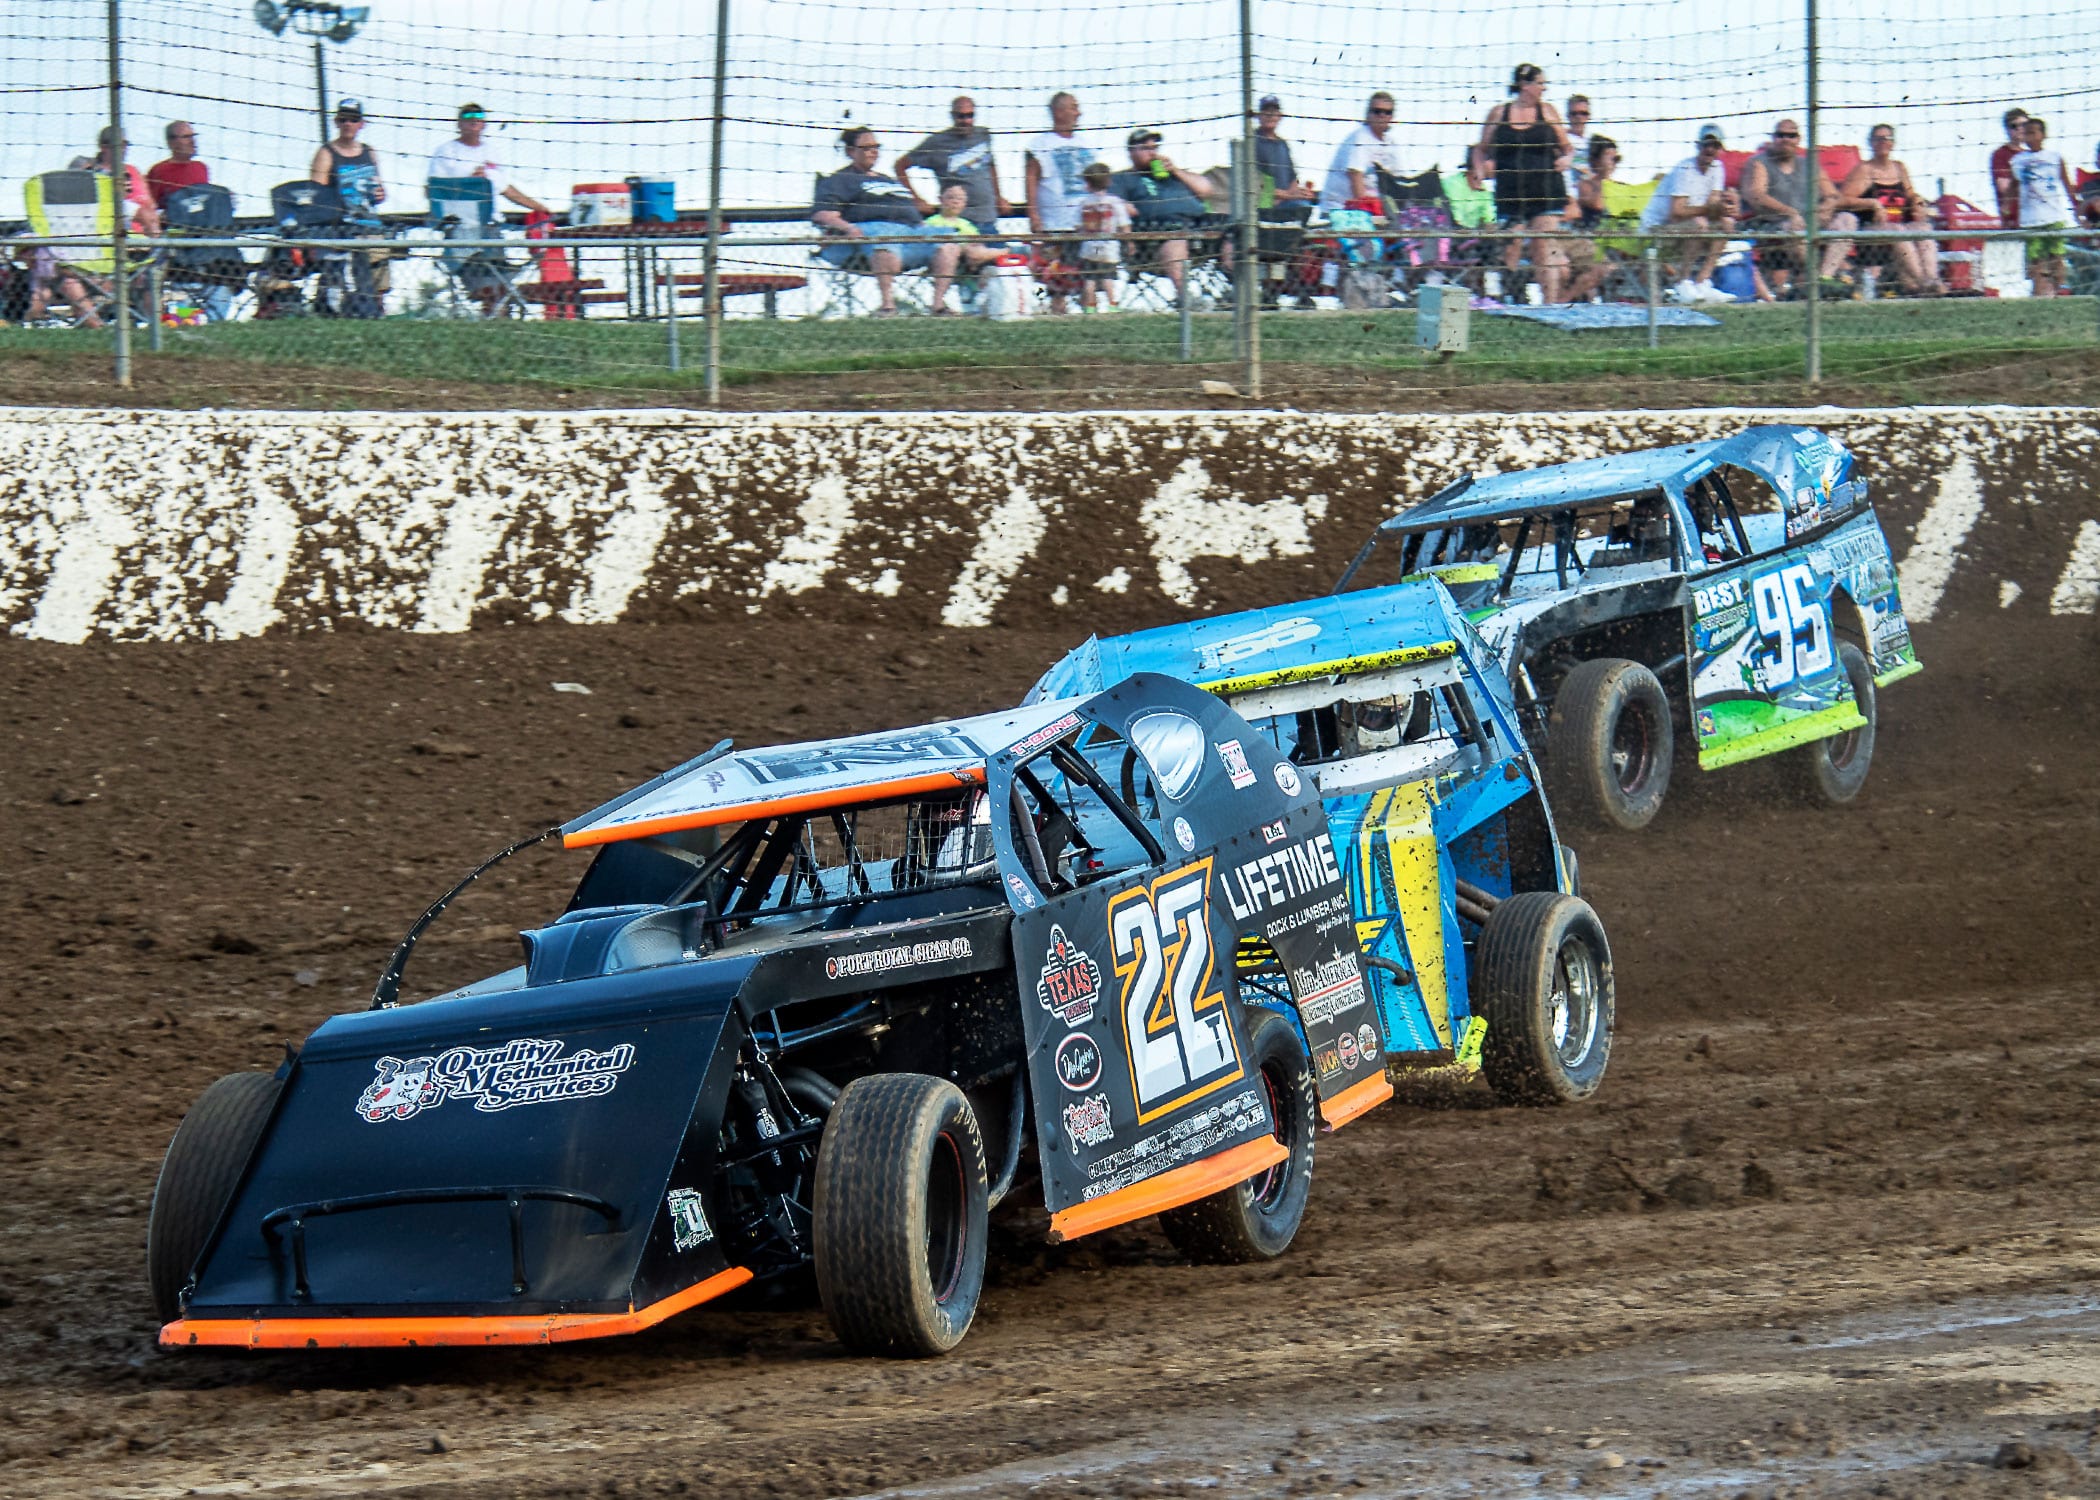 Tony Anderson(22), Ryan Sutter(18) and Jerry Bowersock race hard in their modified heat race at Limaland. (Mike Campbell photo)